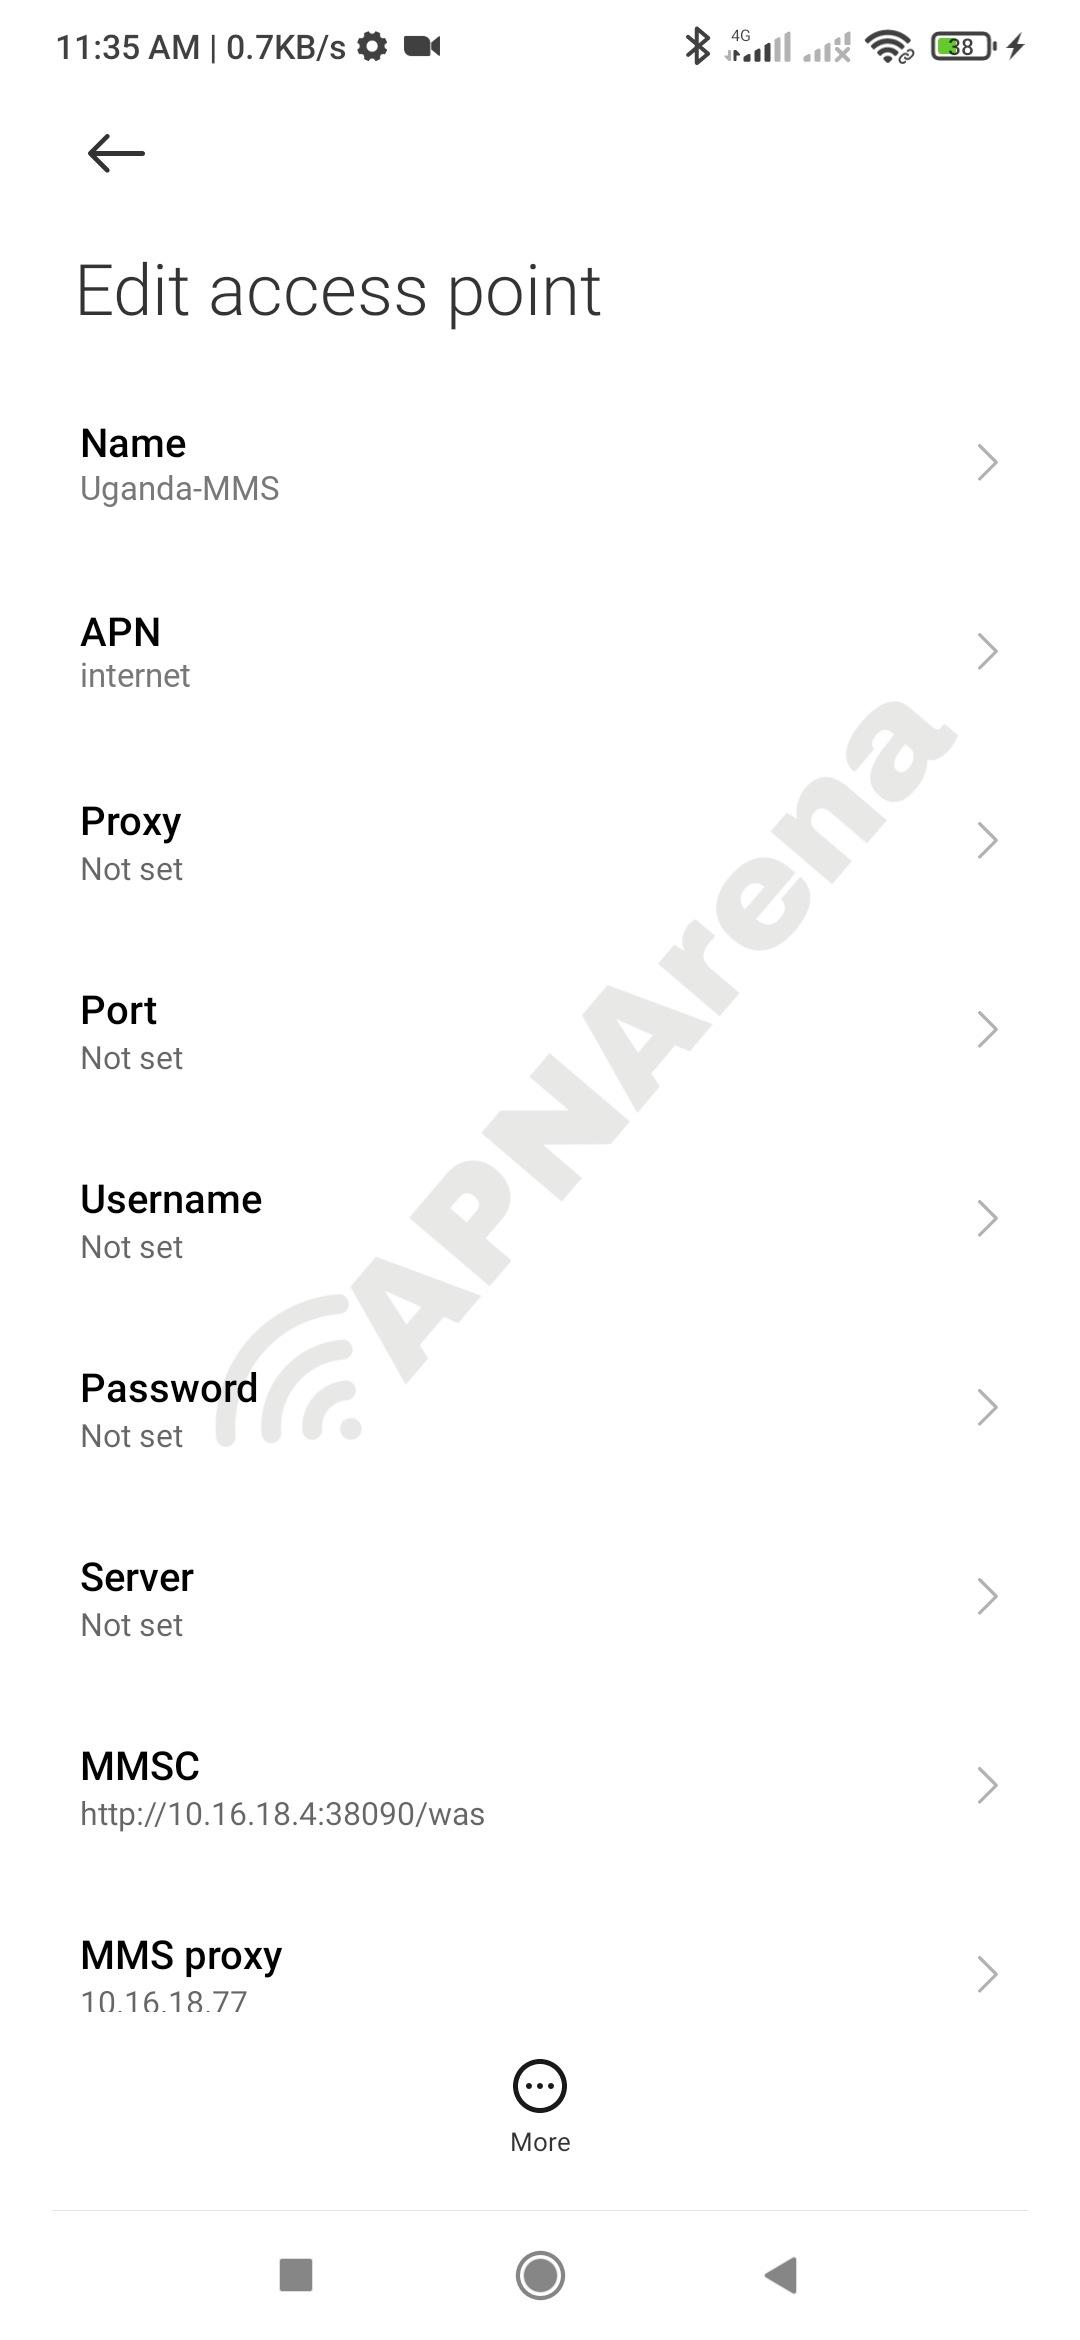 MTN Yemen MMS Settings for Android